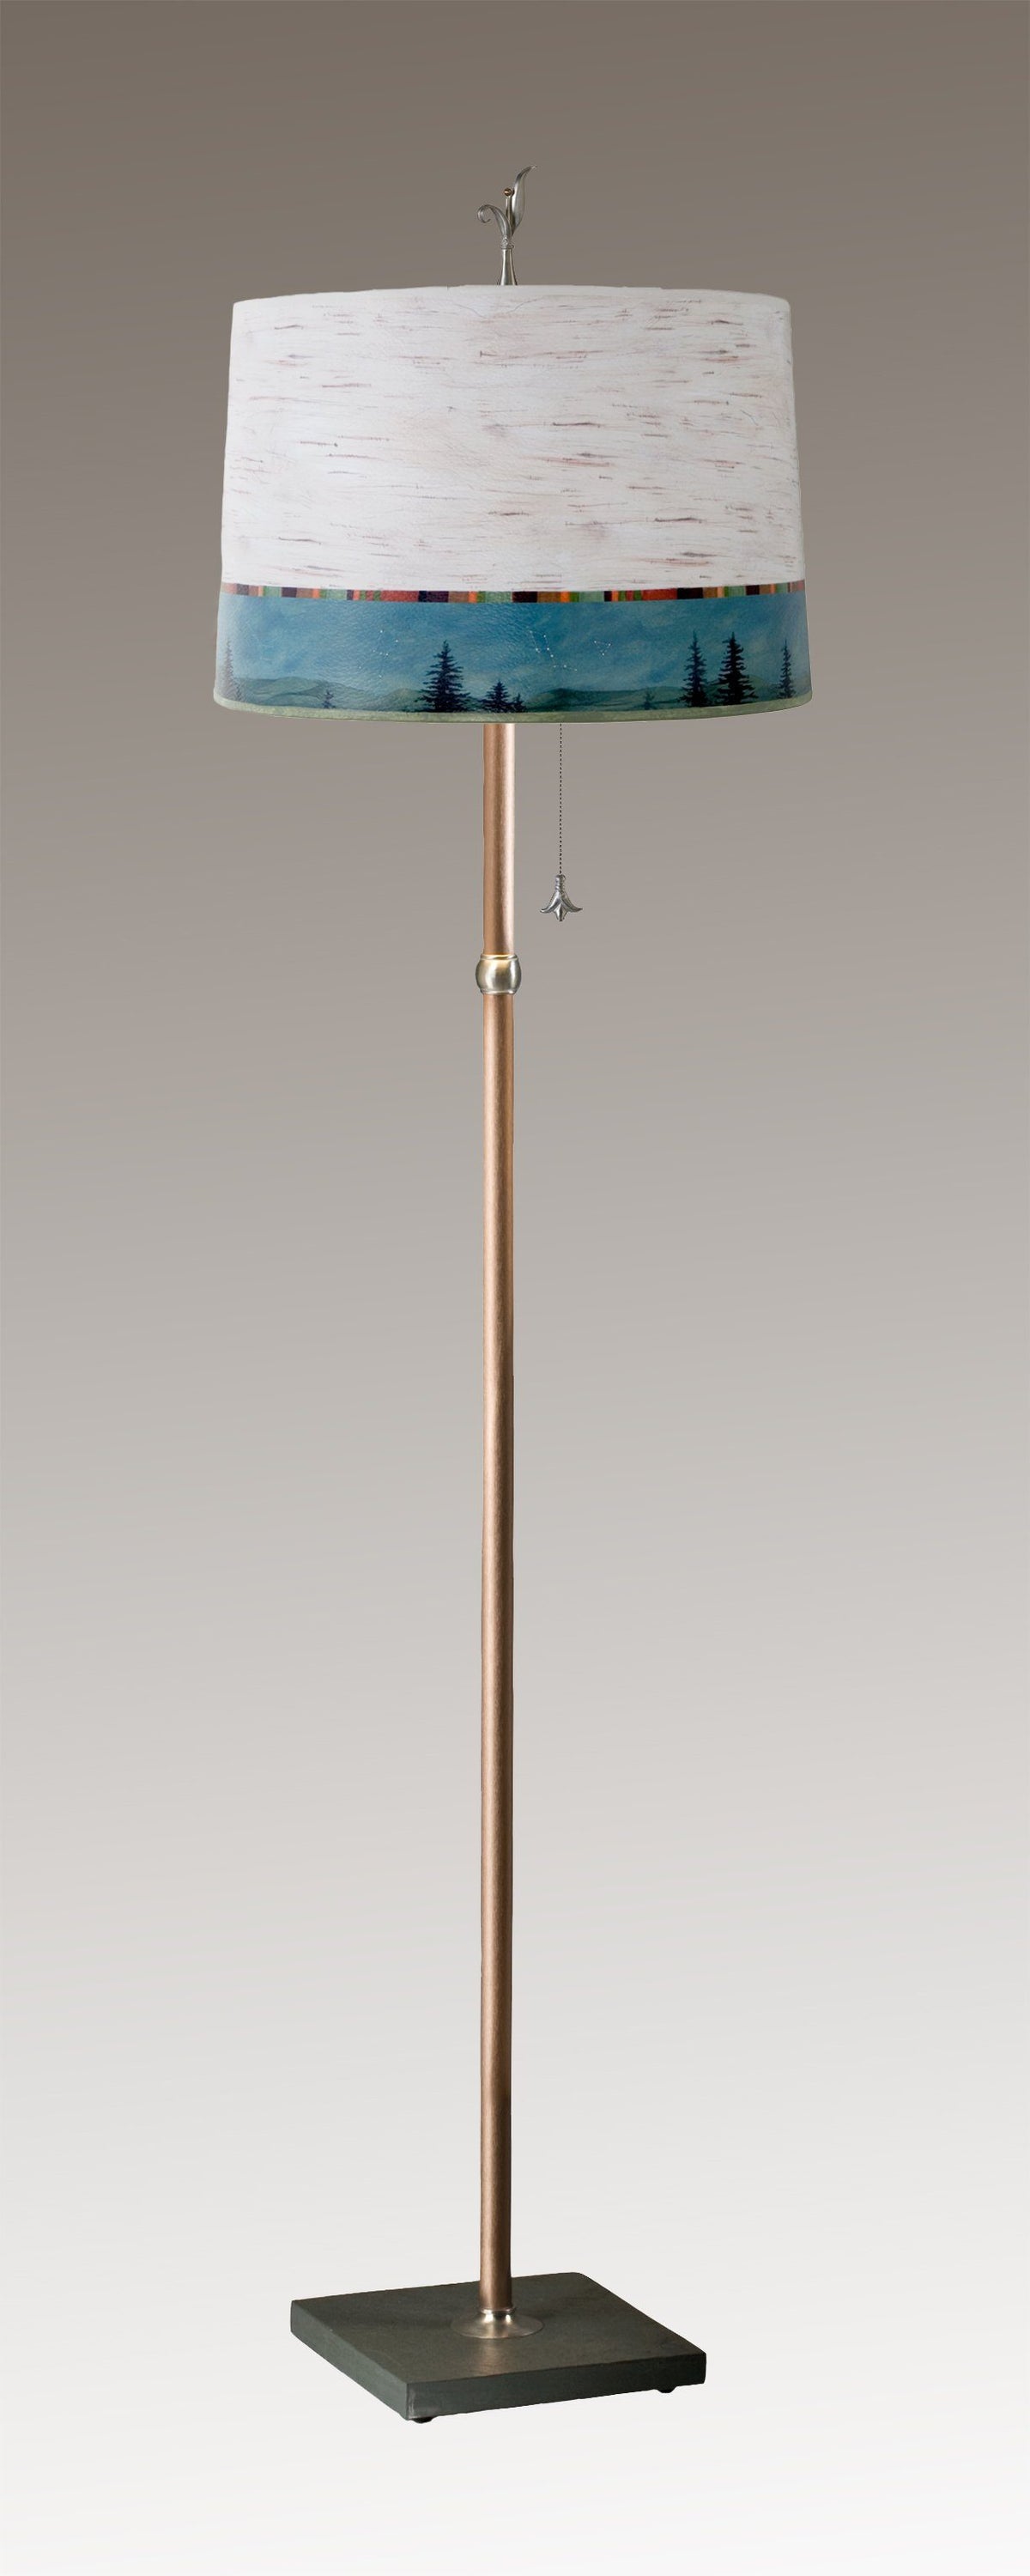 Janna Ugone &amp; Co Floor Lamps Copper Floor Lamp with Large Drum Shade in Birch Midnight